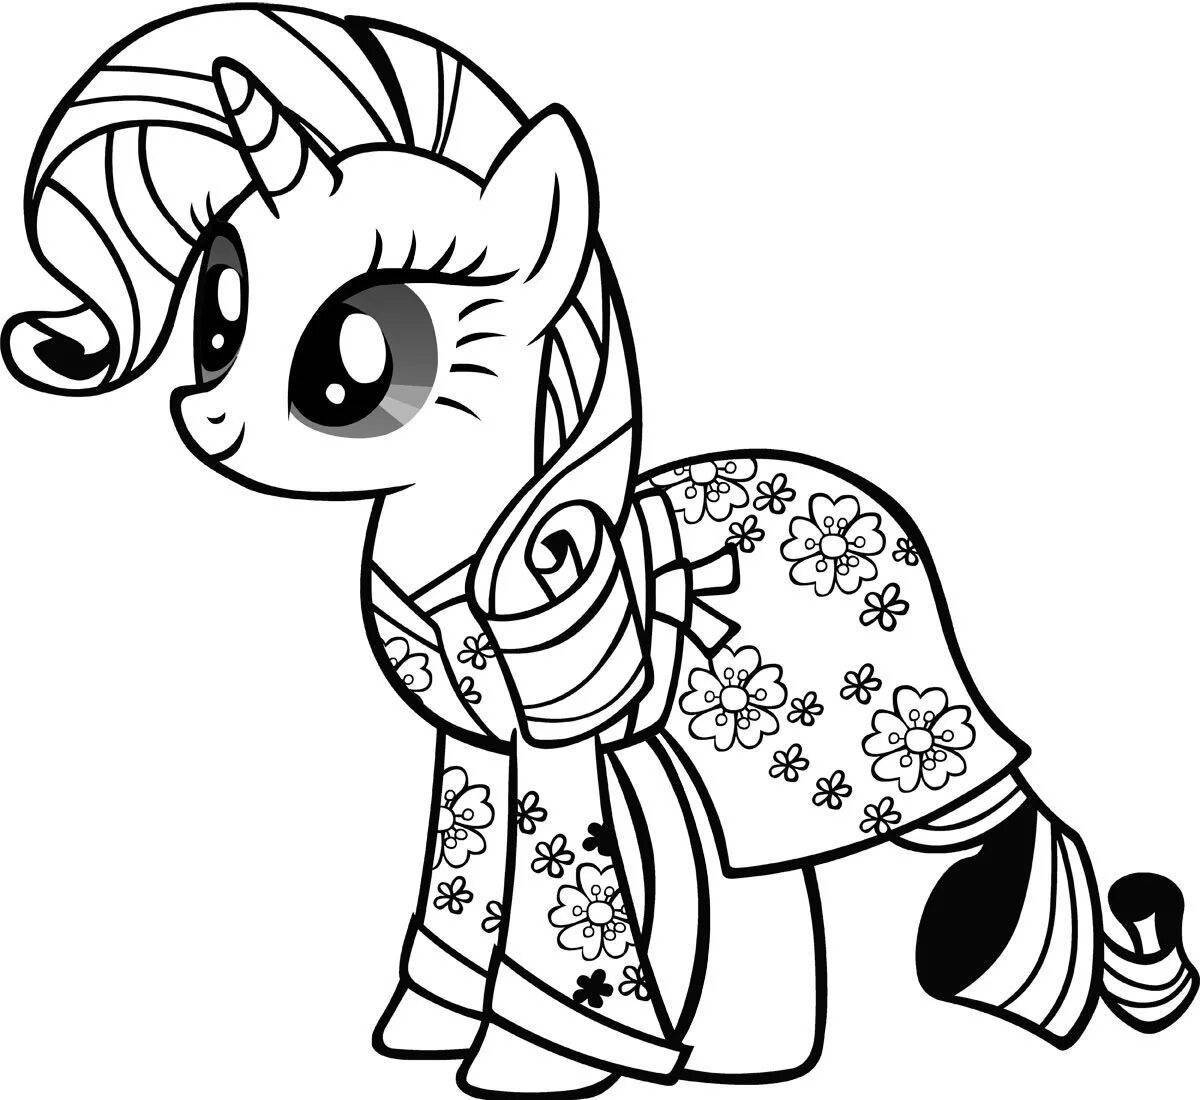 Fantastic pony coloring page